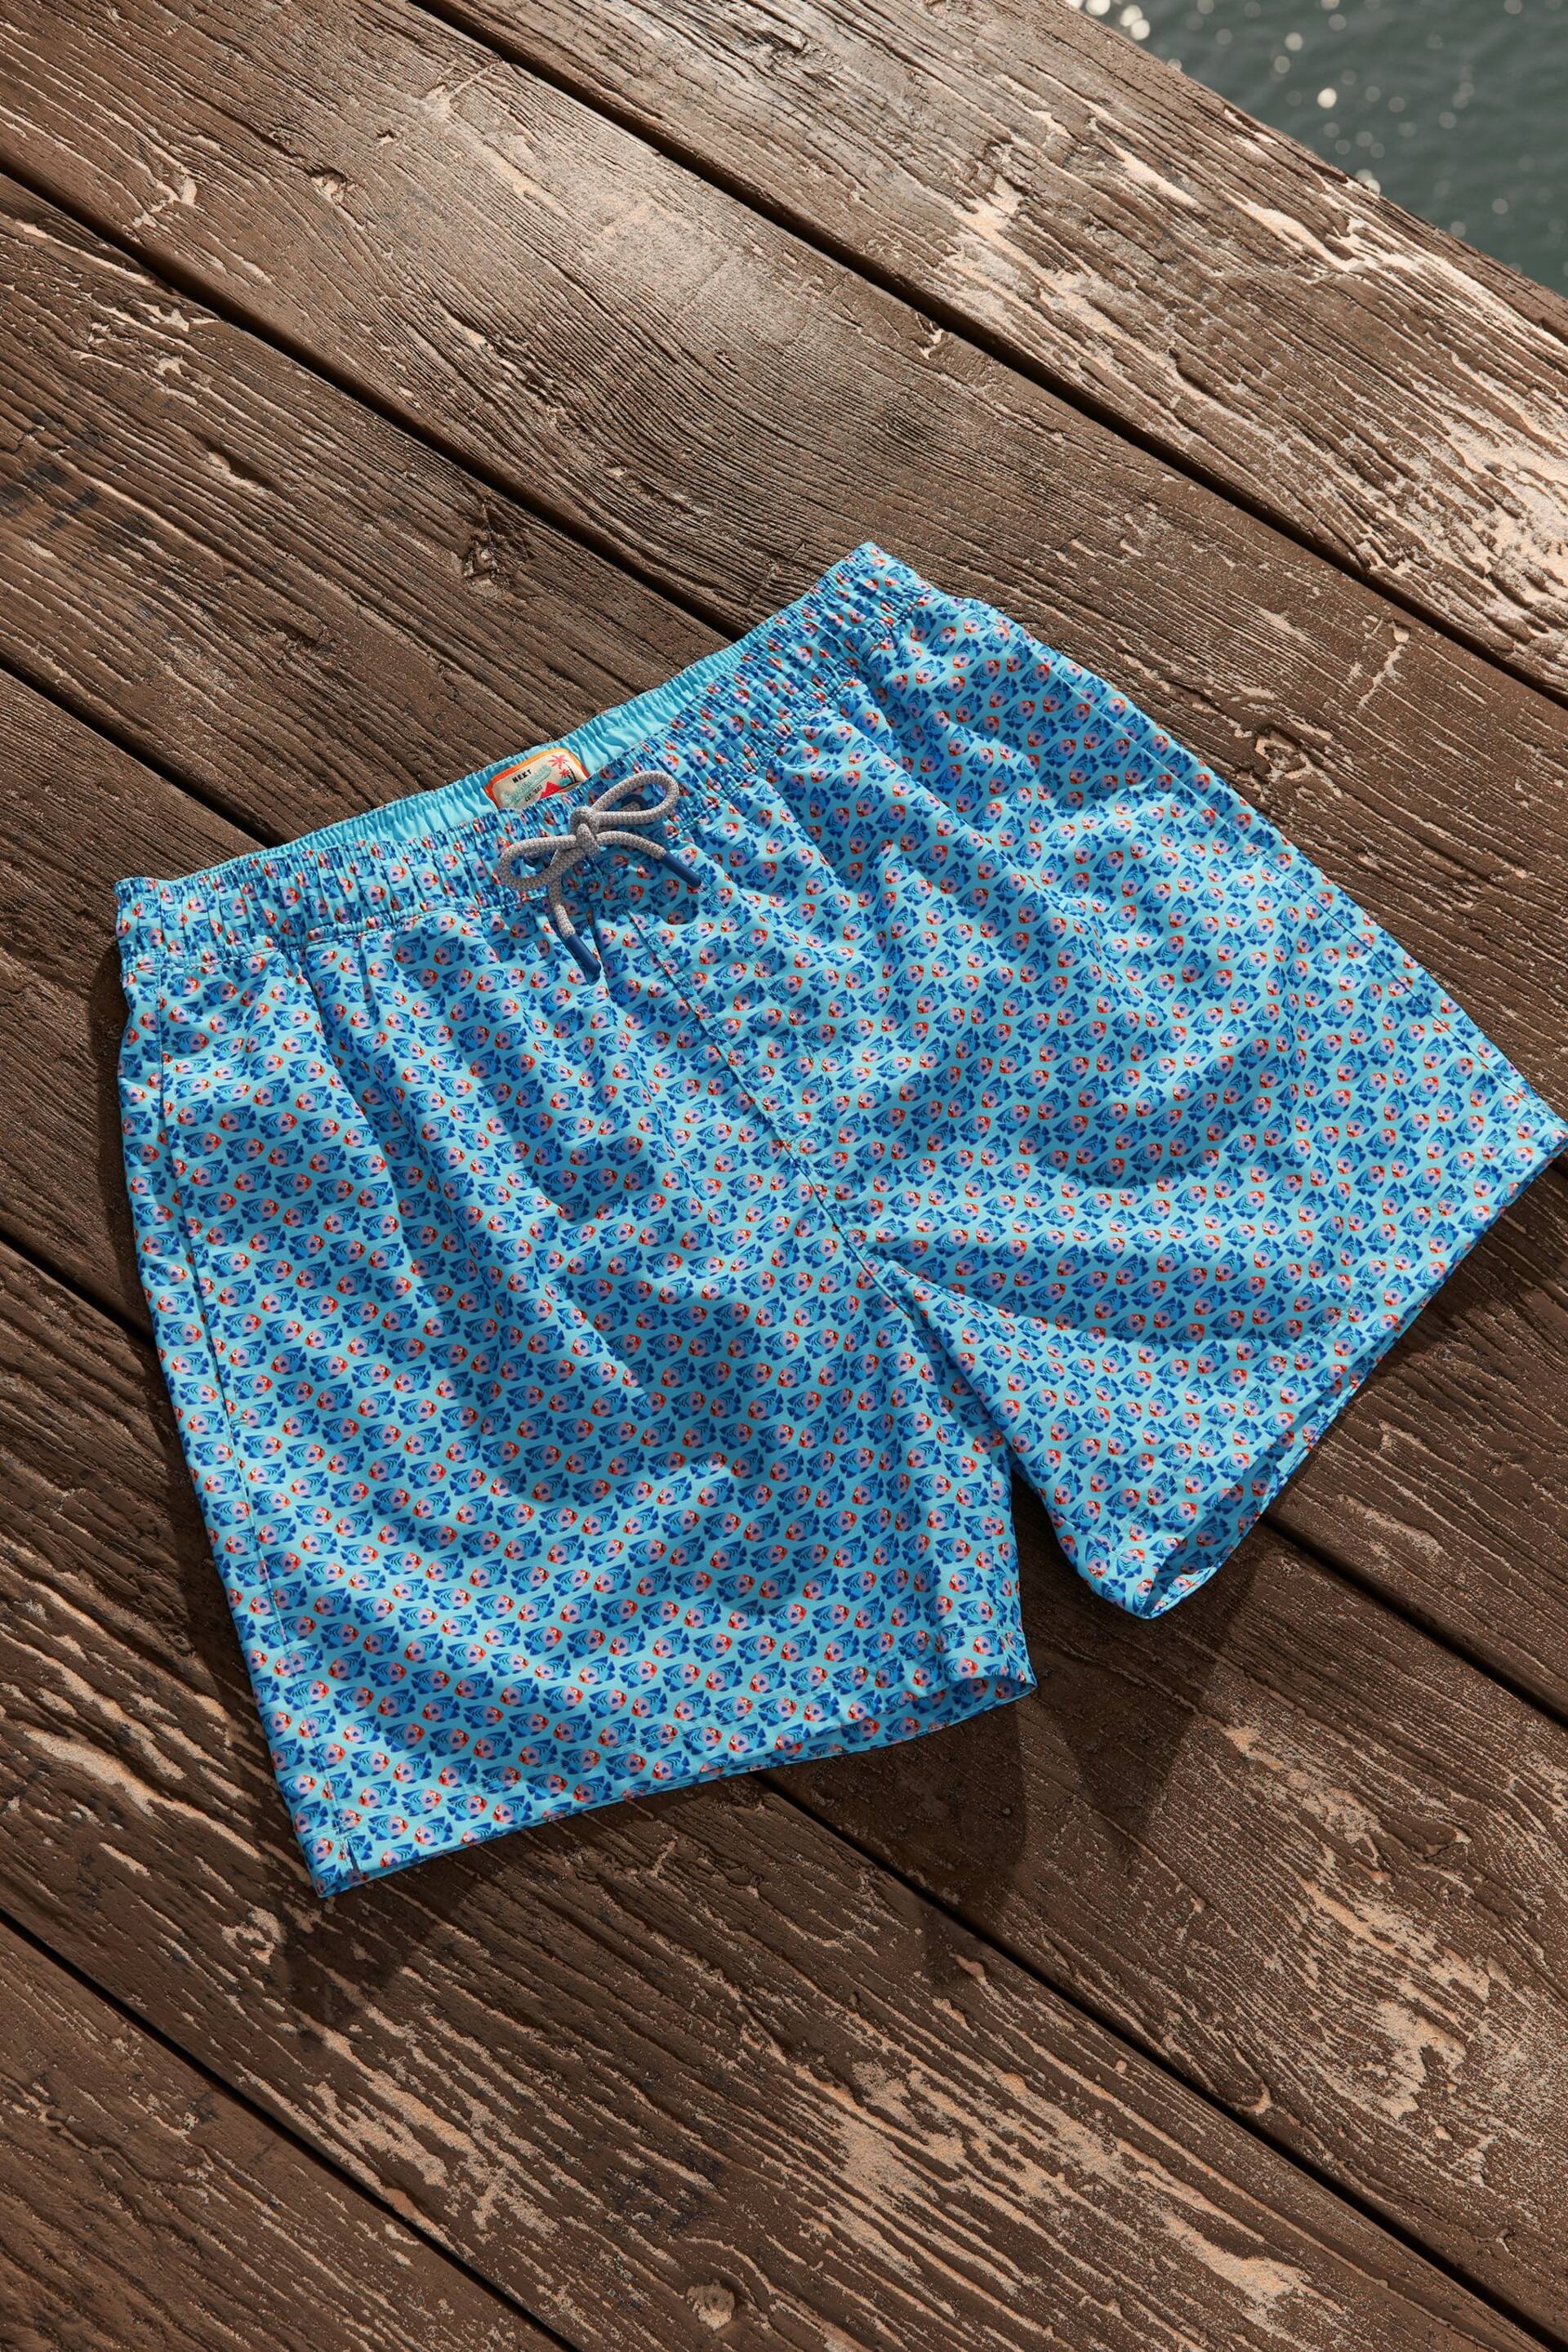 Turquoise Mini Fish Relaxed Fit Printed Swim Shorts - Image 6 of 11